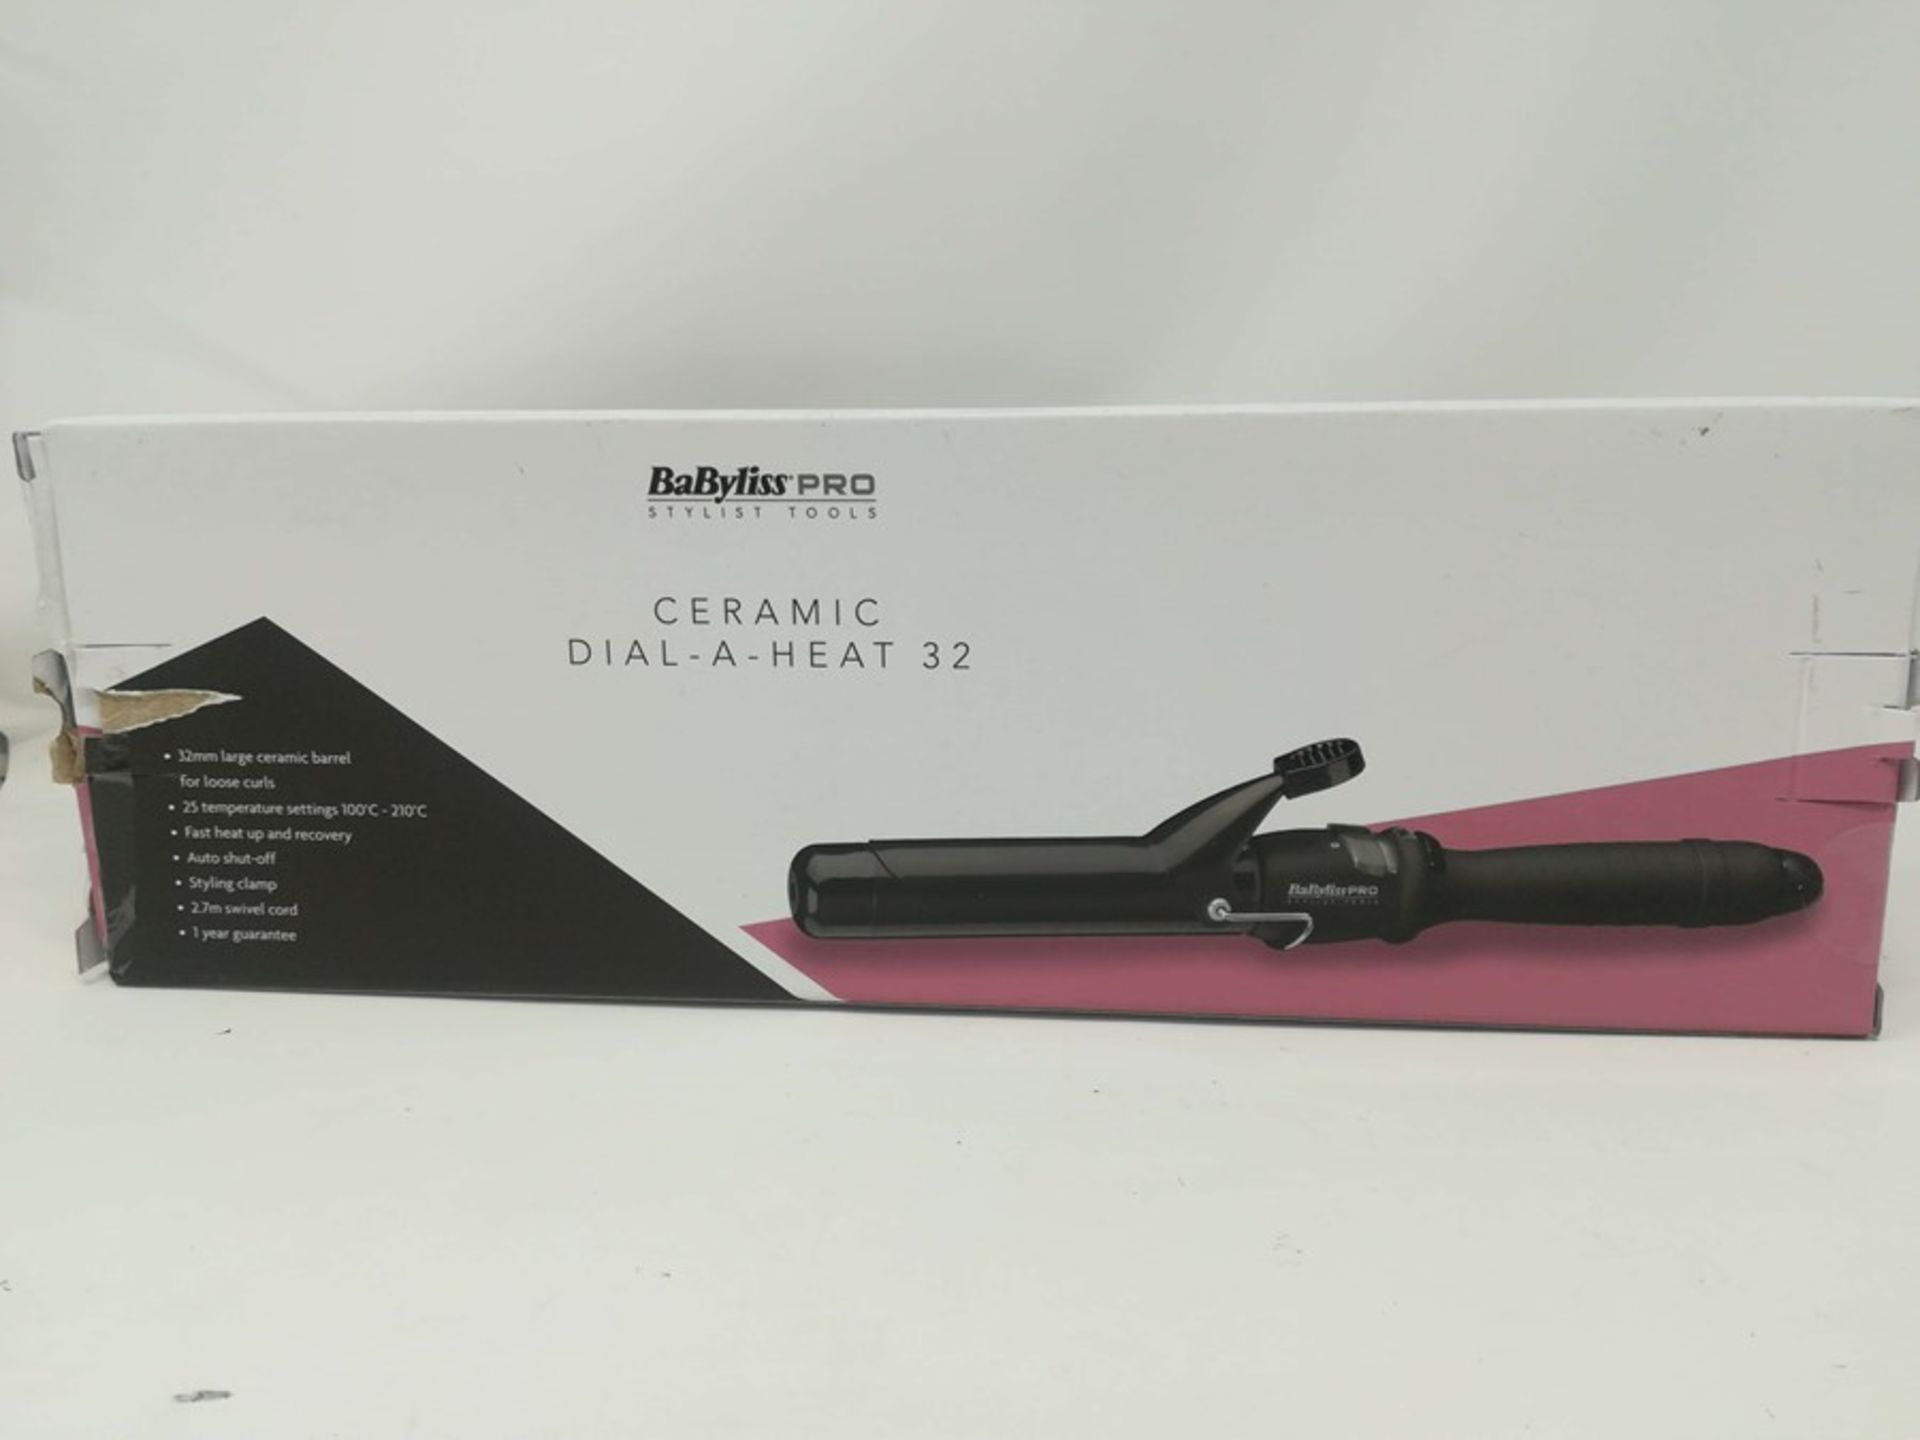 Babyliss 32mm Pro Ceramic Dial a Heat Curling Wa - Image 2 of 2